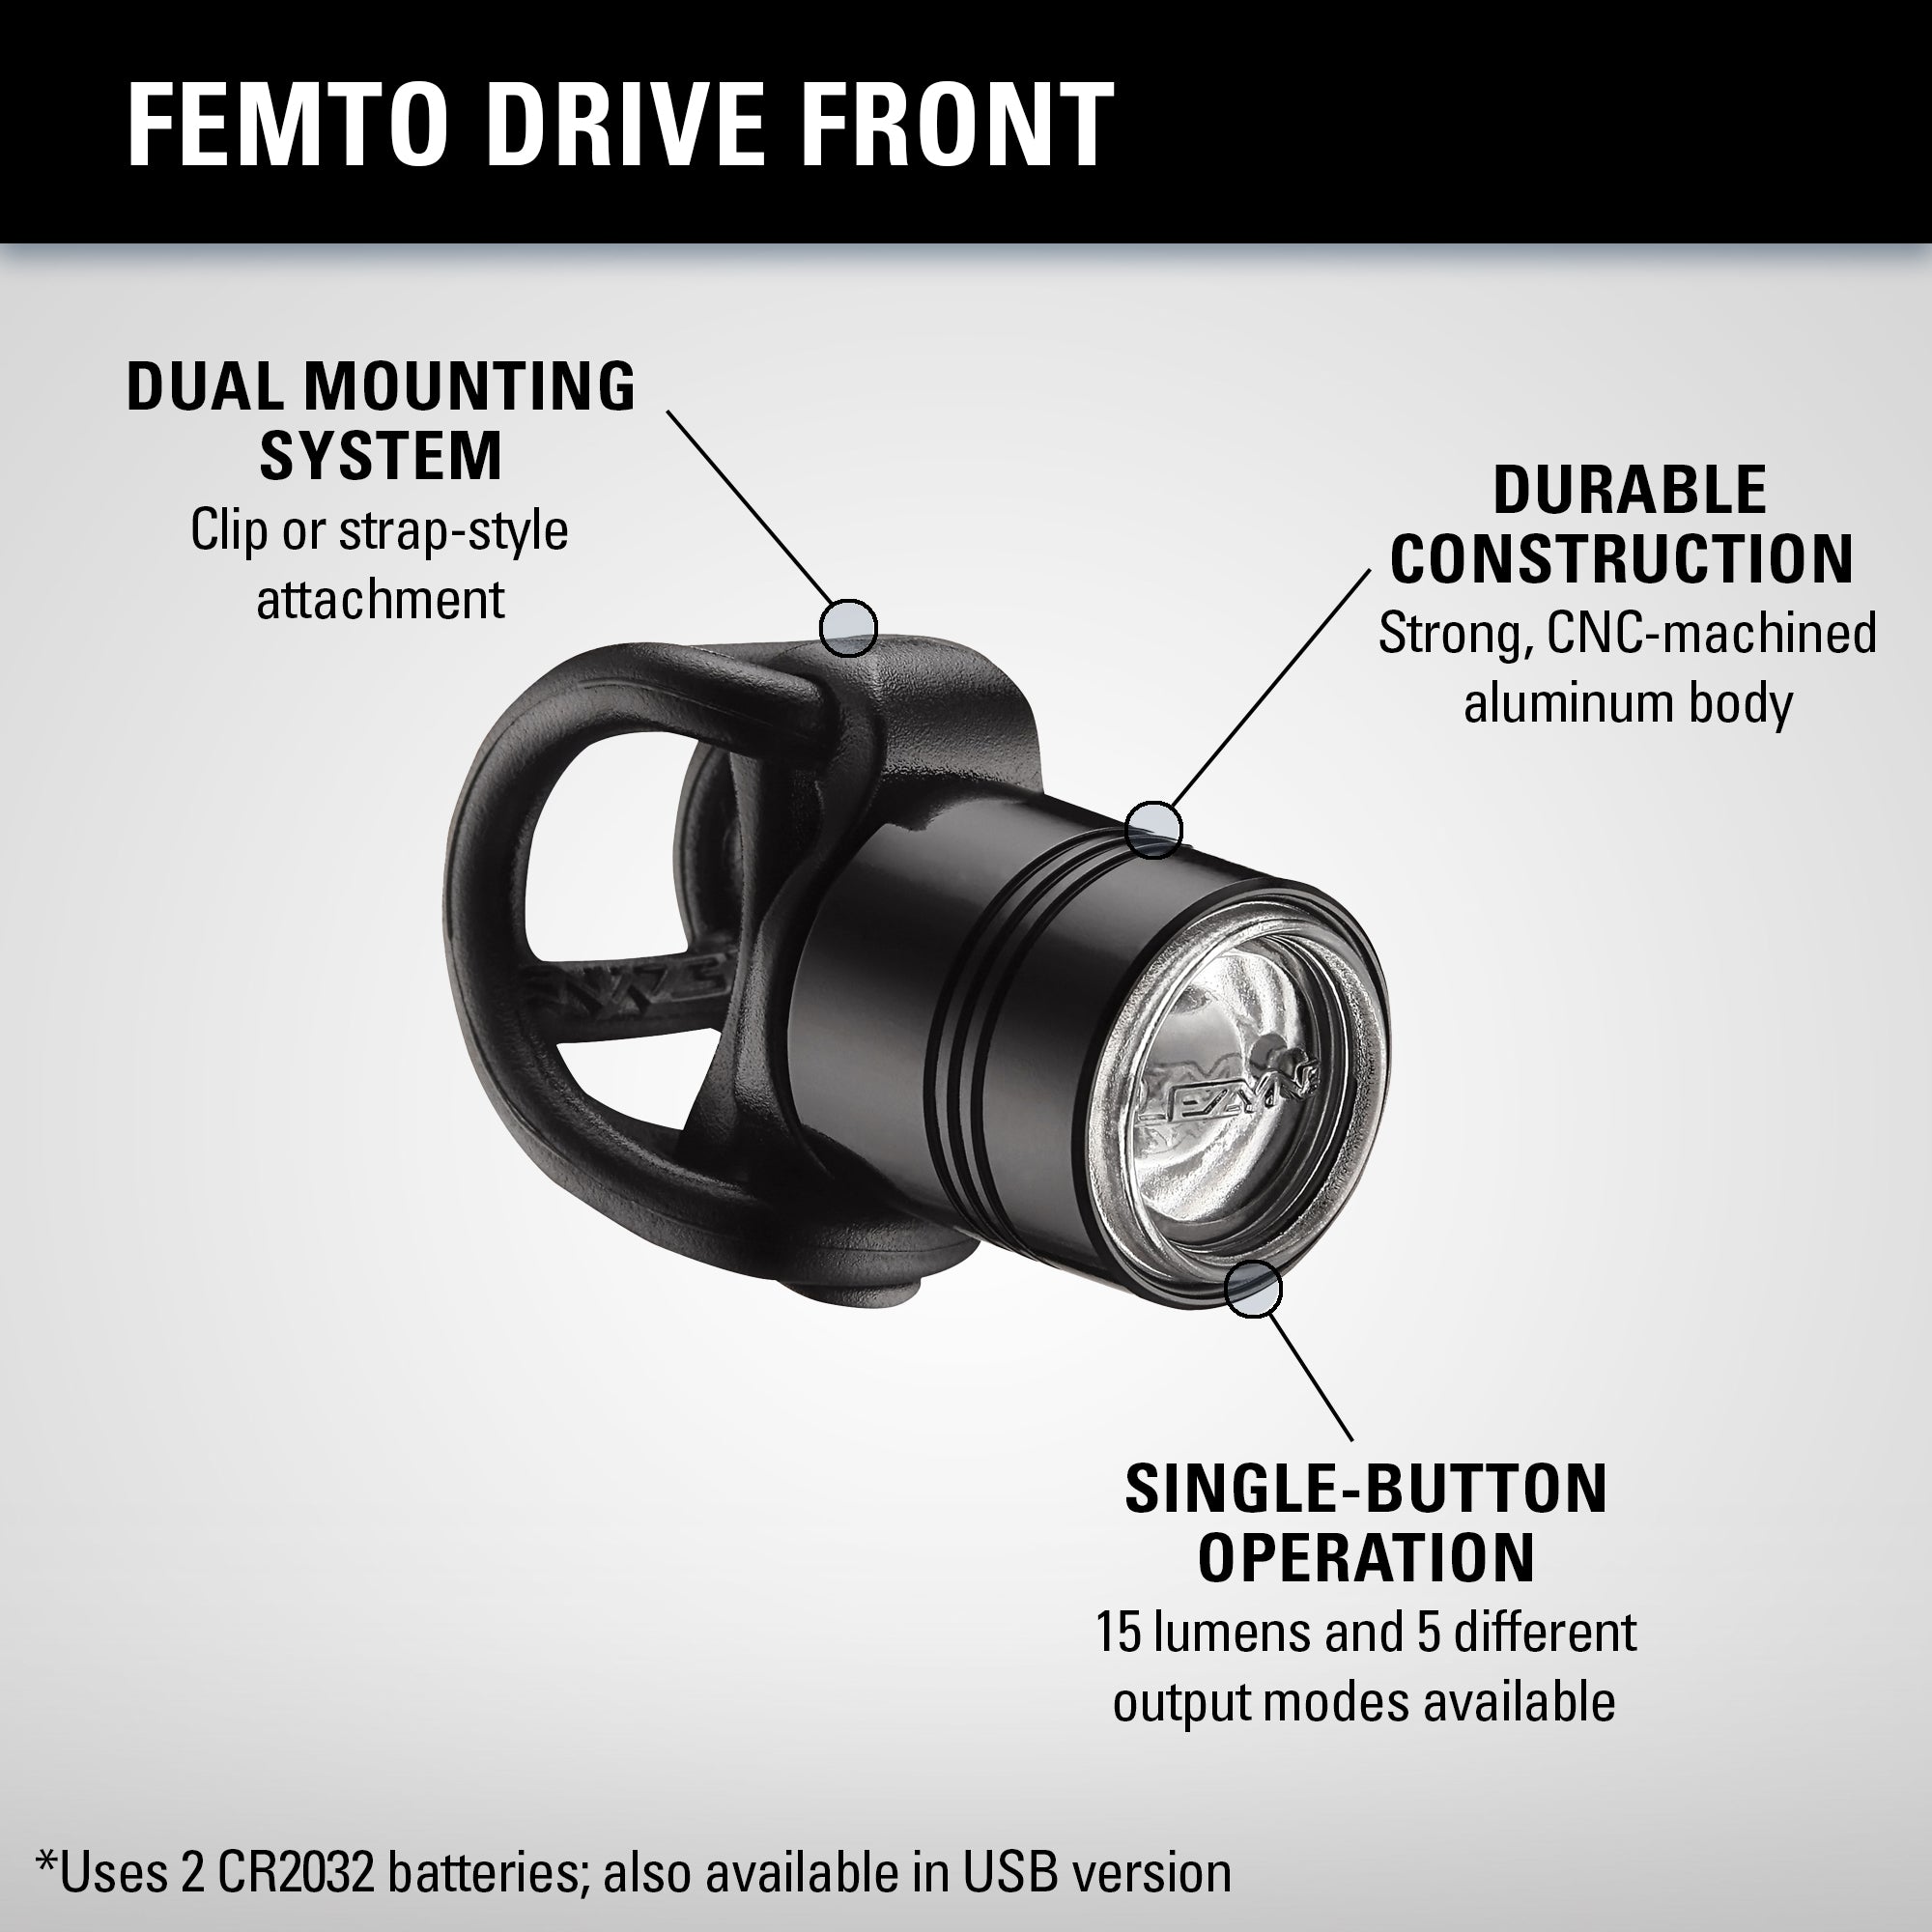 Infographic for Femto Drive front bike light. Dual mounting system (clip or strap-style attachment). Durable construction (strong, CNC-machined aluminum body). Single-button operation (15 lumens and 5 different output modes available. Uses 2 CR2032 batteries; also available in USB version. 